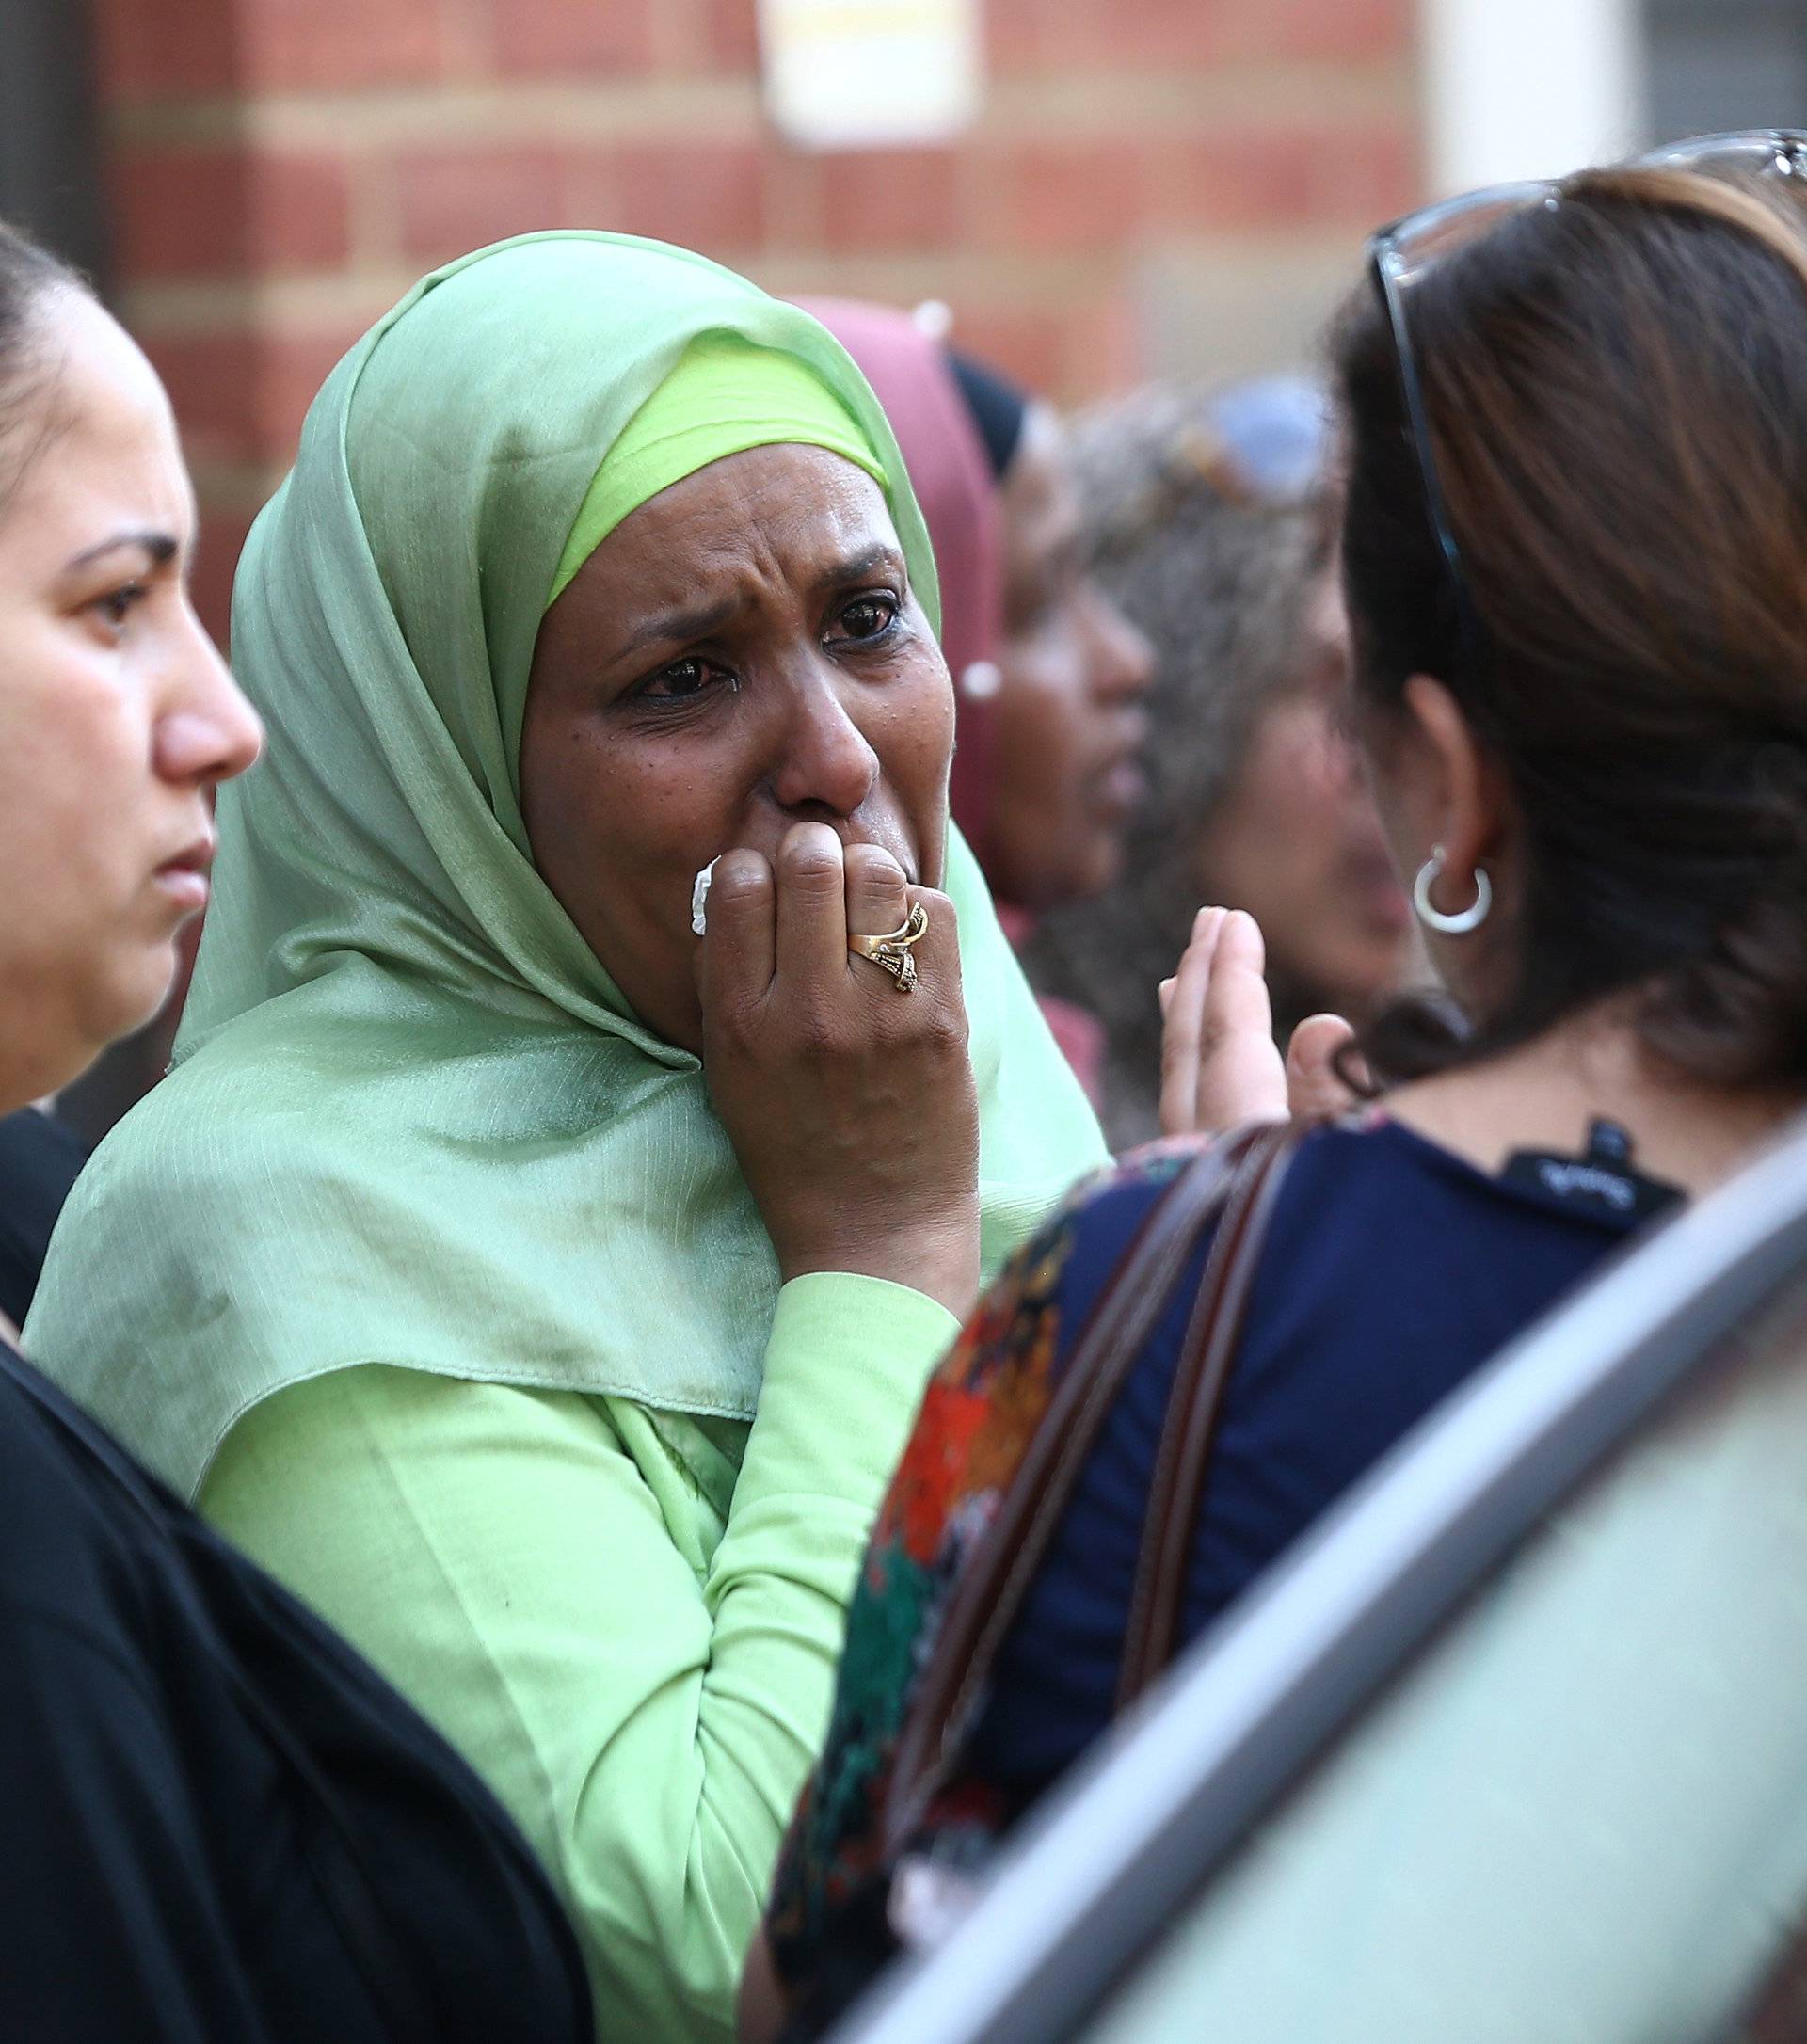 People react near a tower block severely damaged by a serious fire, in north Kensington, West London